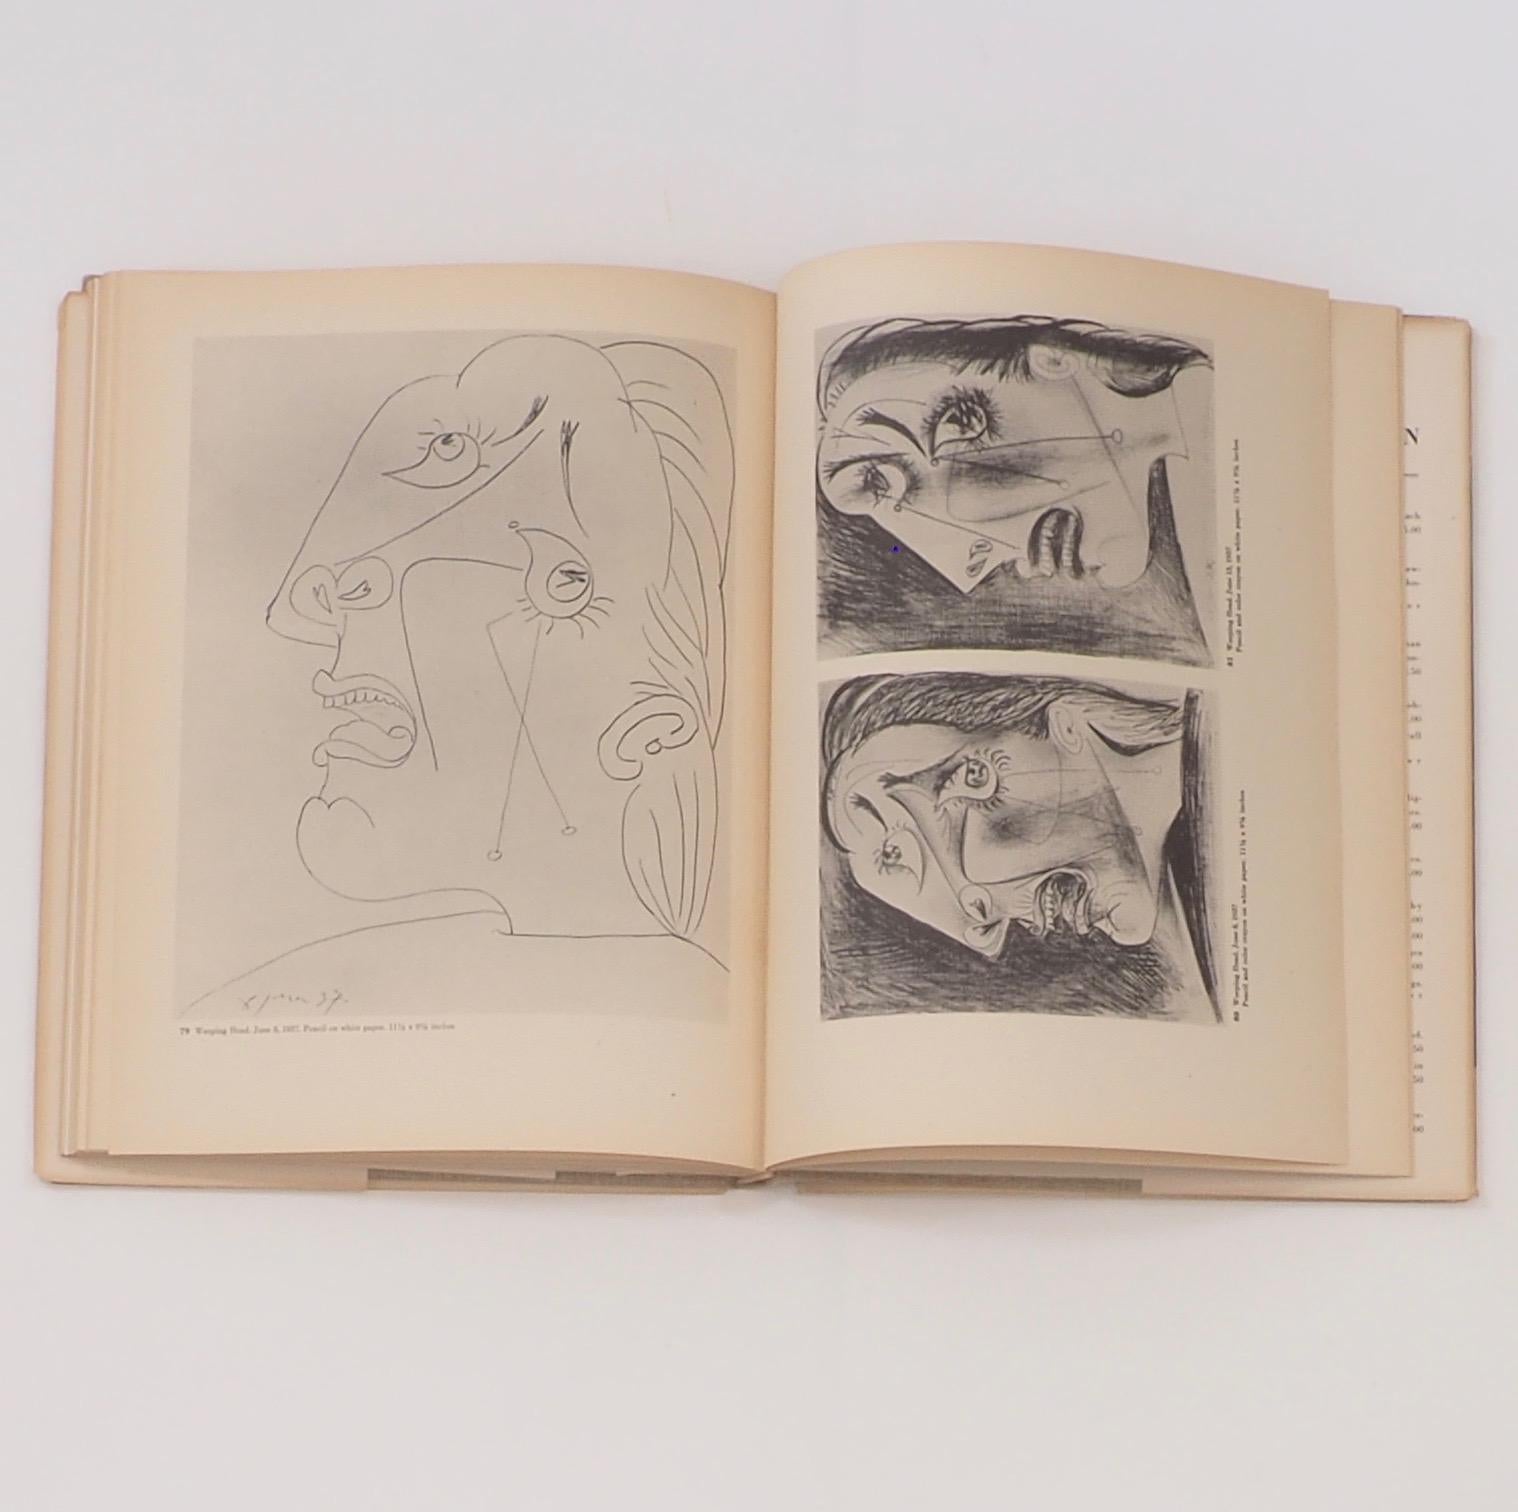 Paper Picasso - Guernica - First Edition 1947